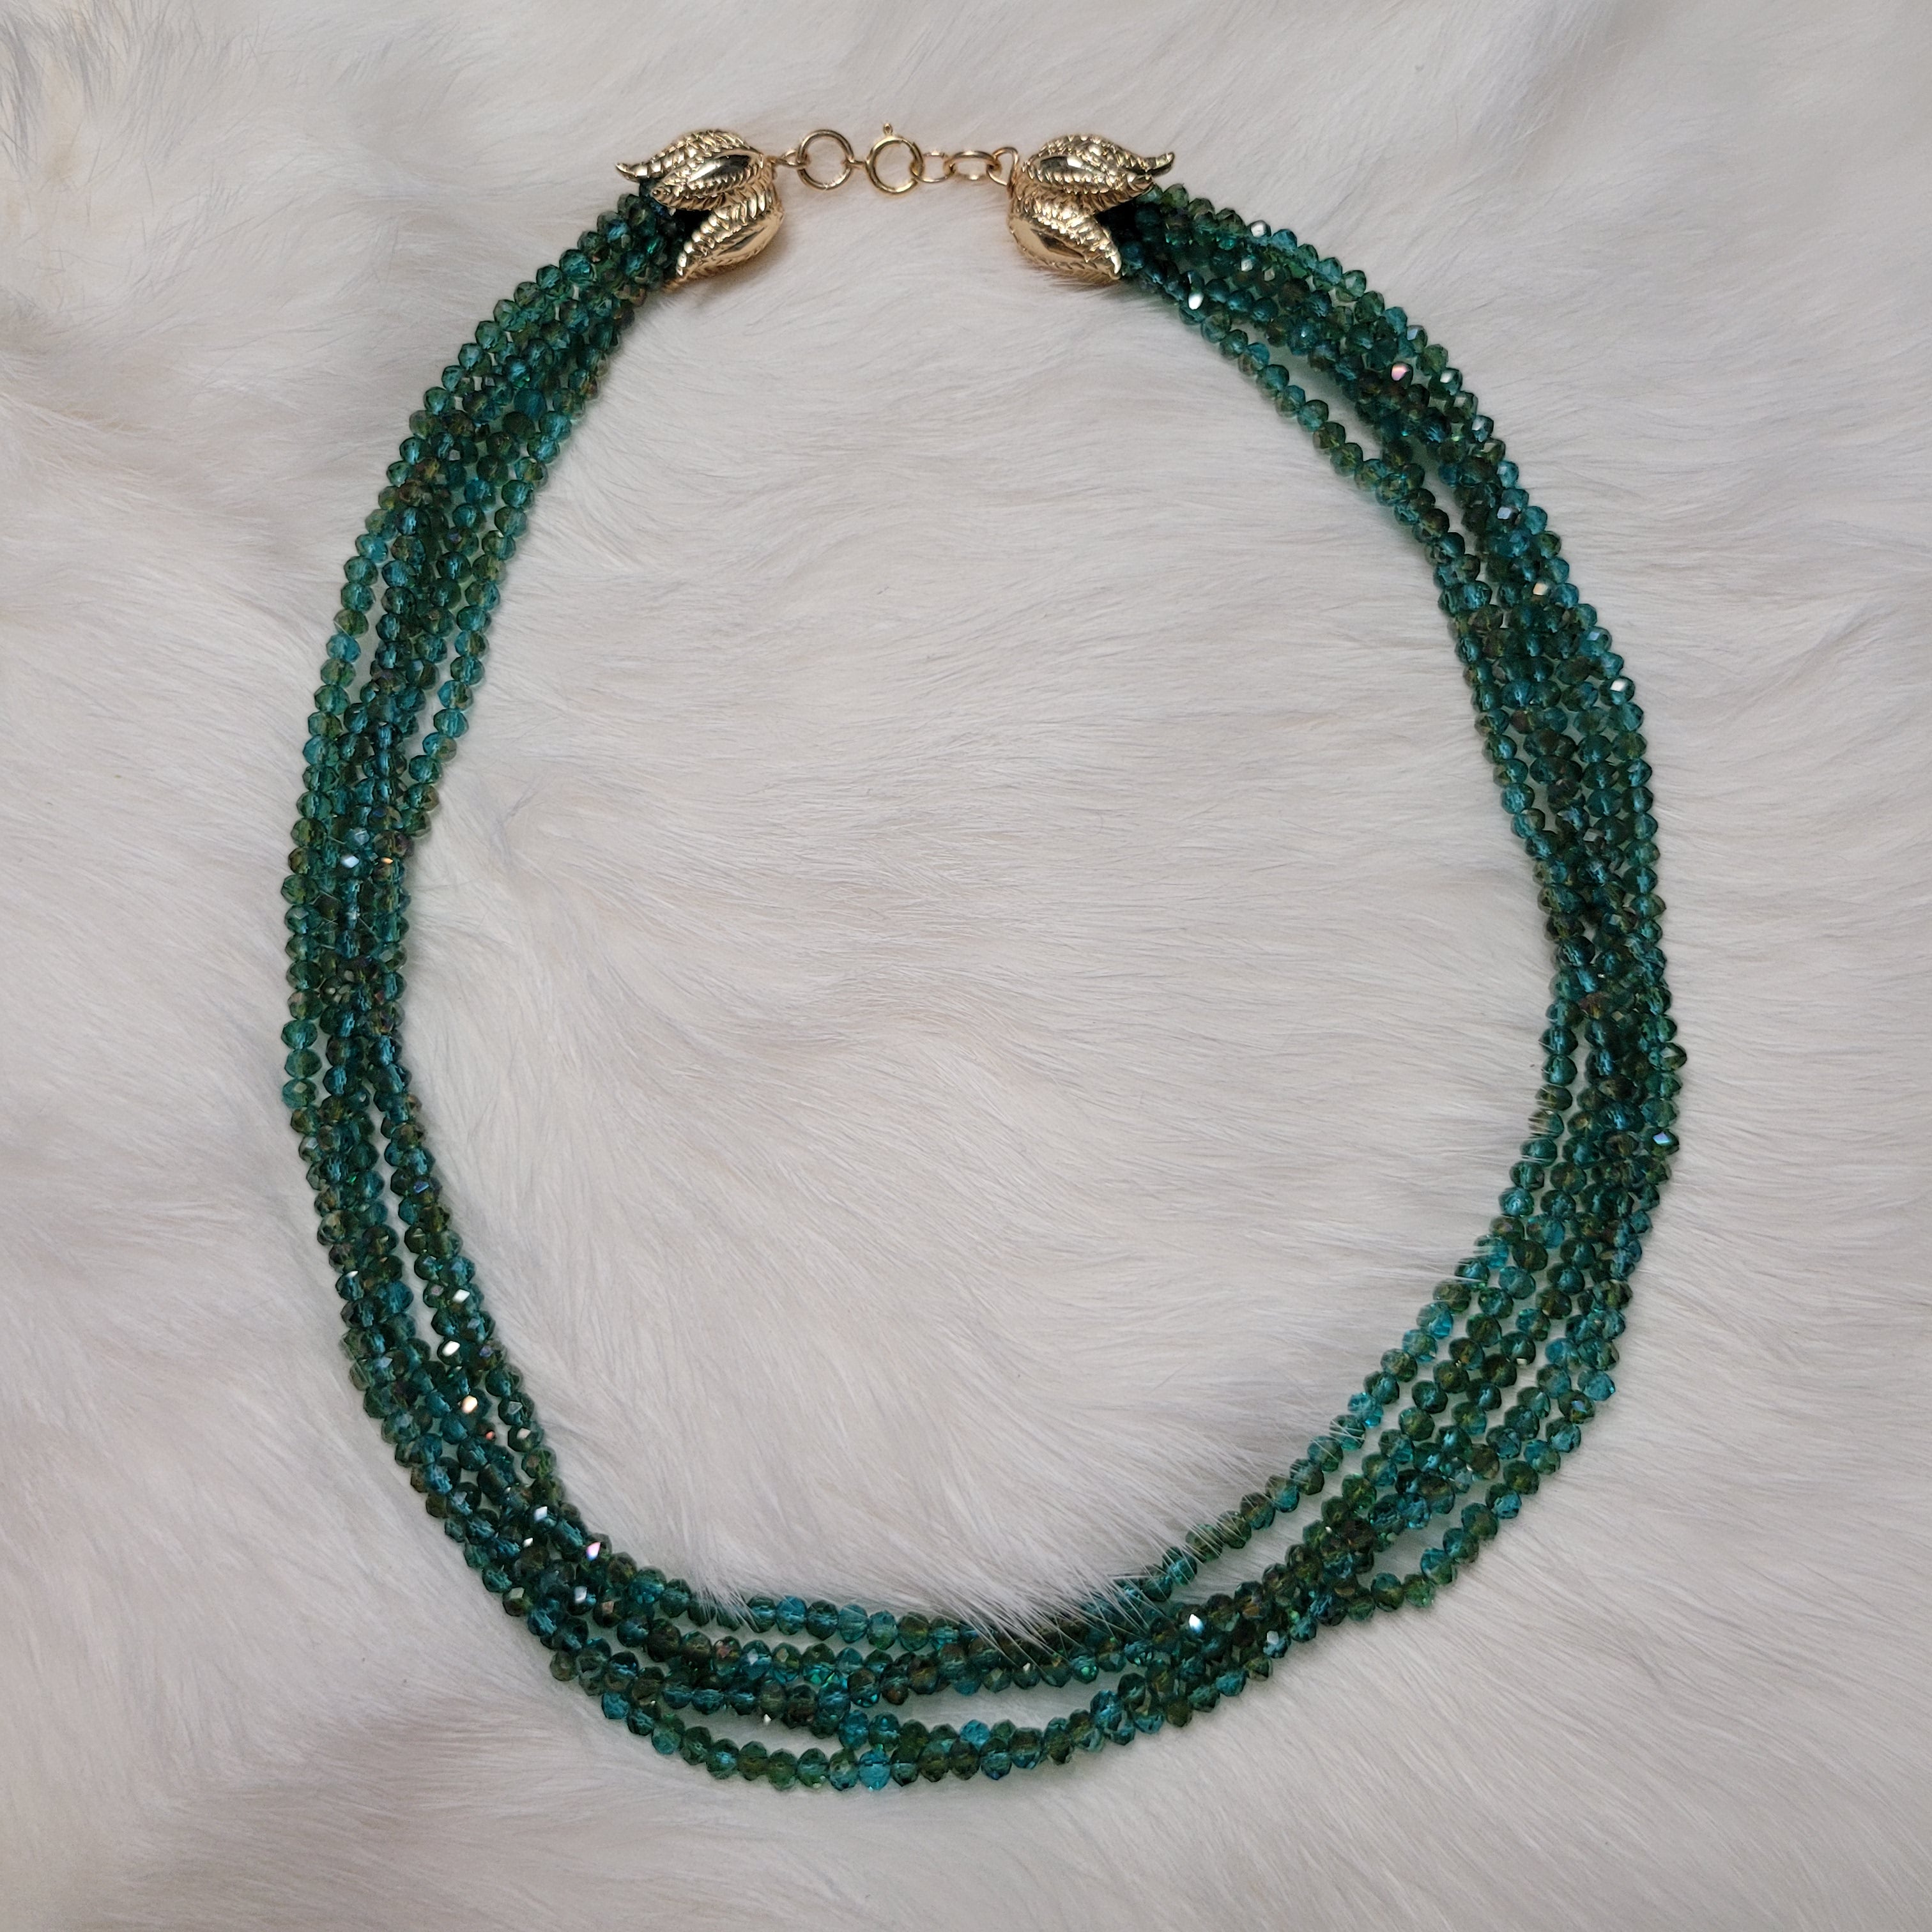 Oasis Green Multi-Strand Necklace